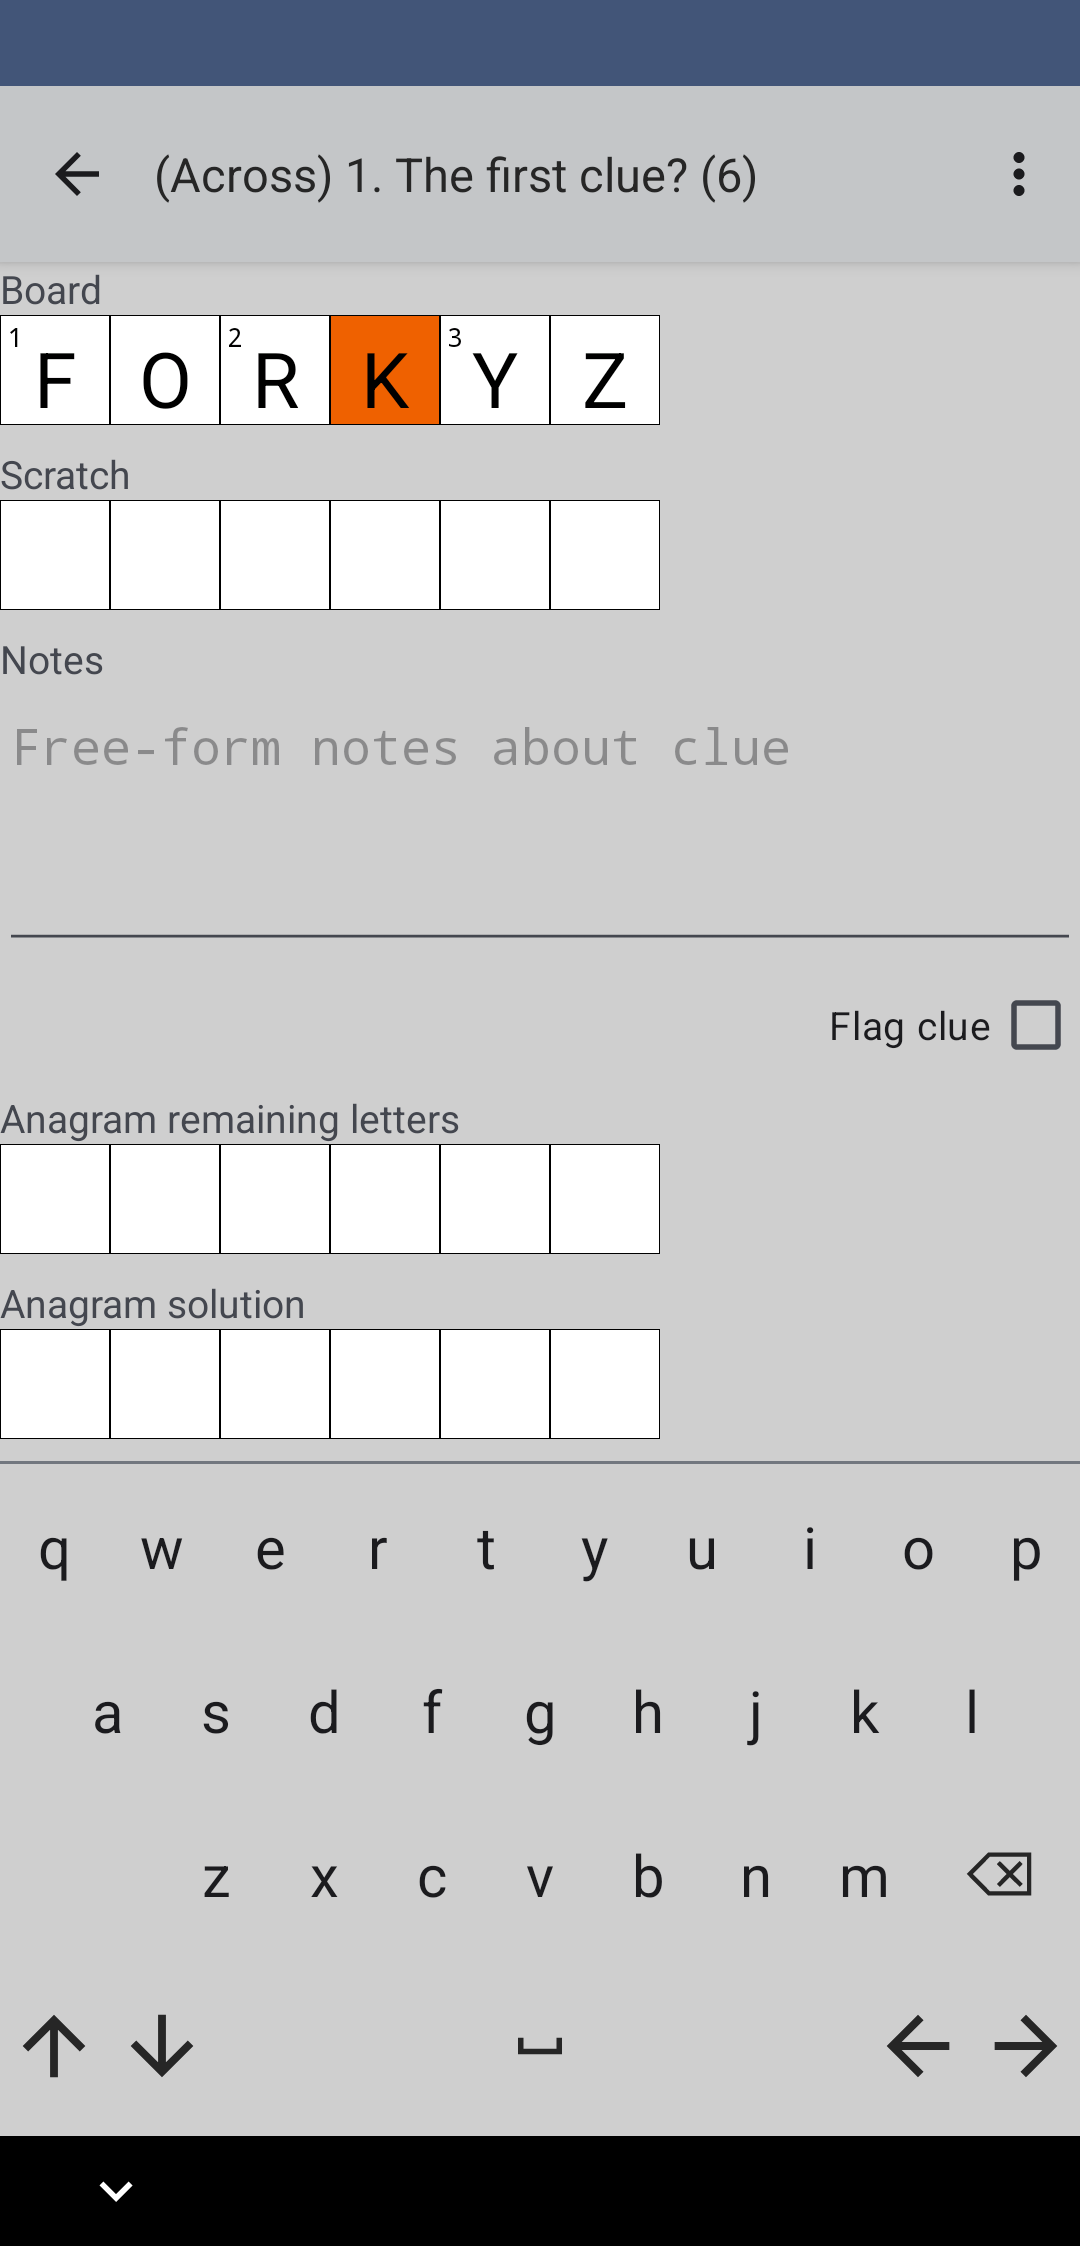 The clue/puzzle notes page with anagram helper